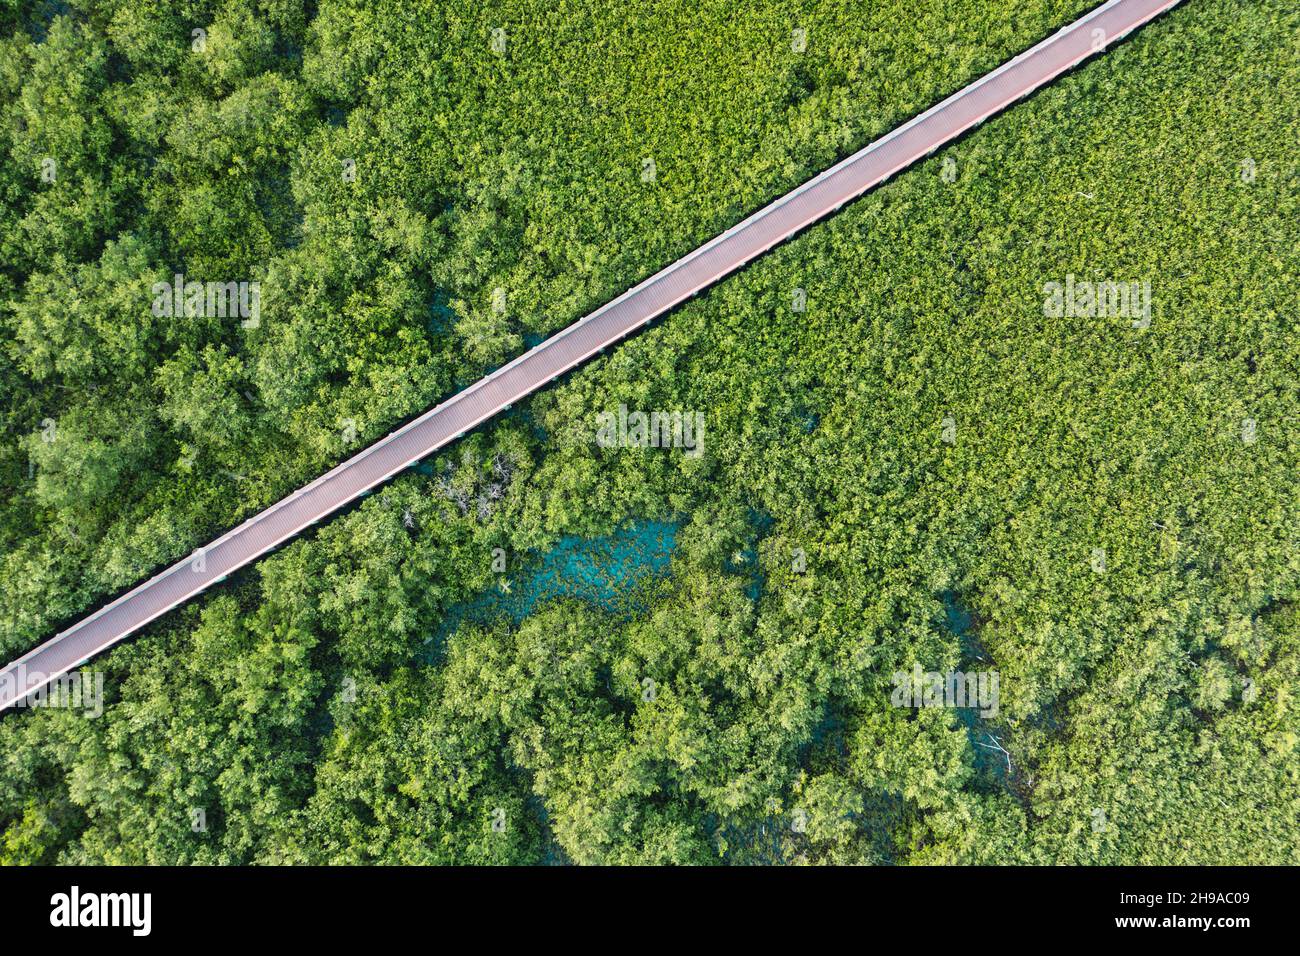 Aerial of Ponce Inlet Preserve black mangrove (Avicennia germinans) swamp with a reddish wooden walkway cutting ta diagonal line through the trees. Stock Photo